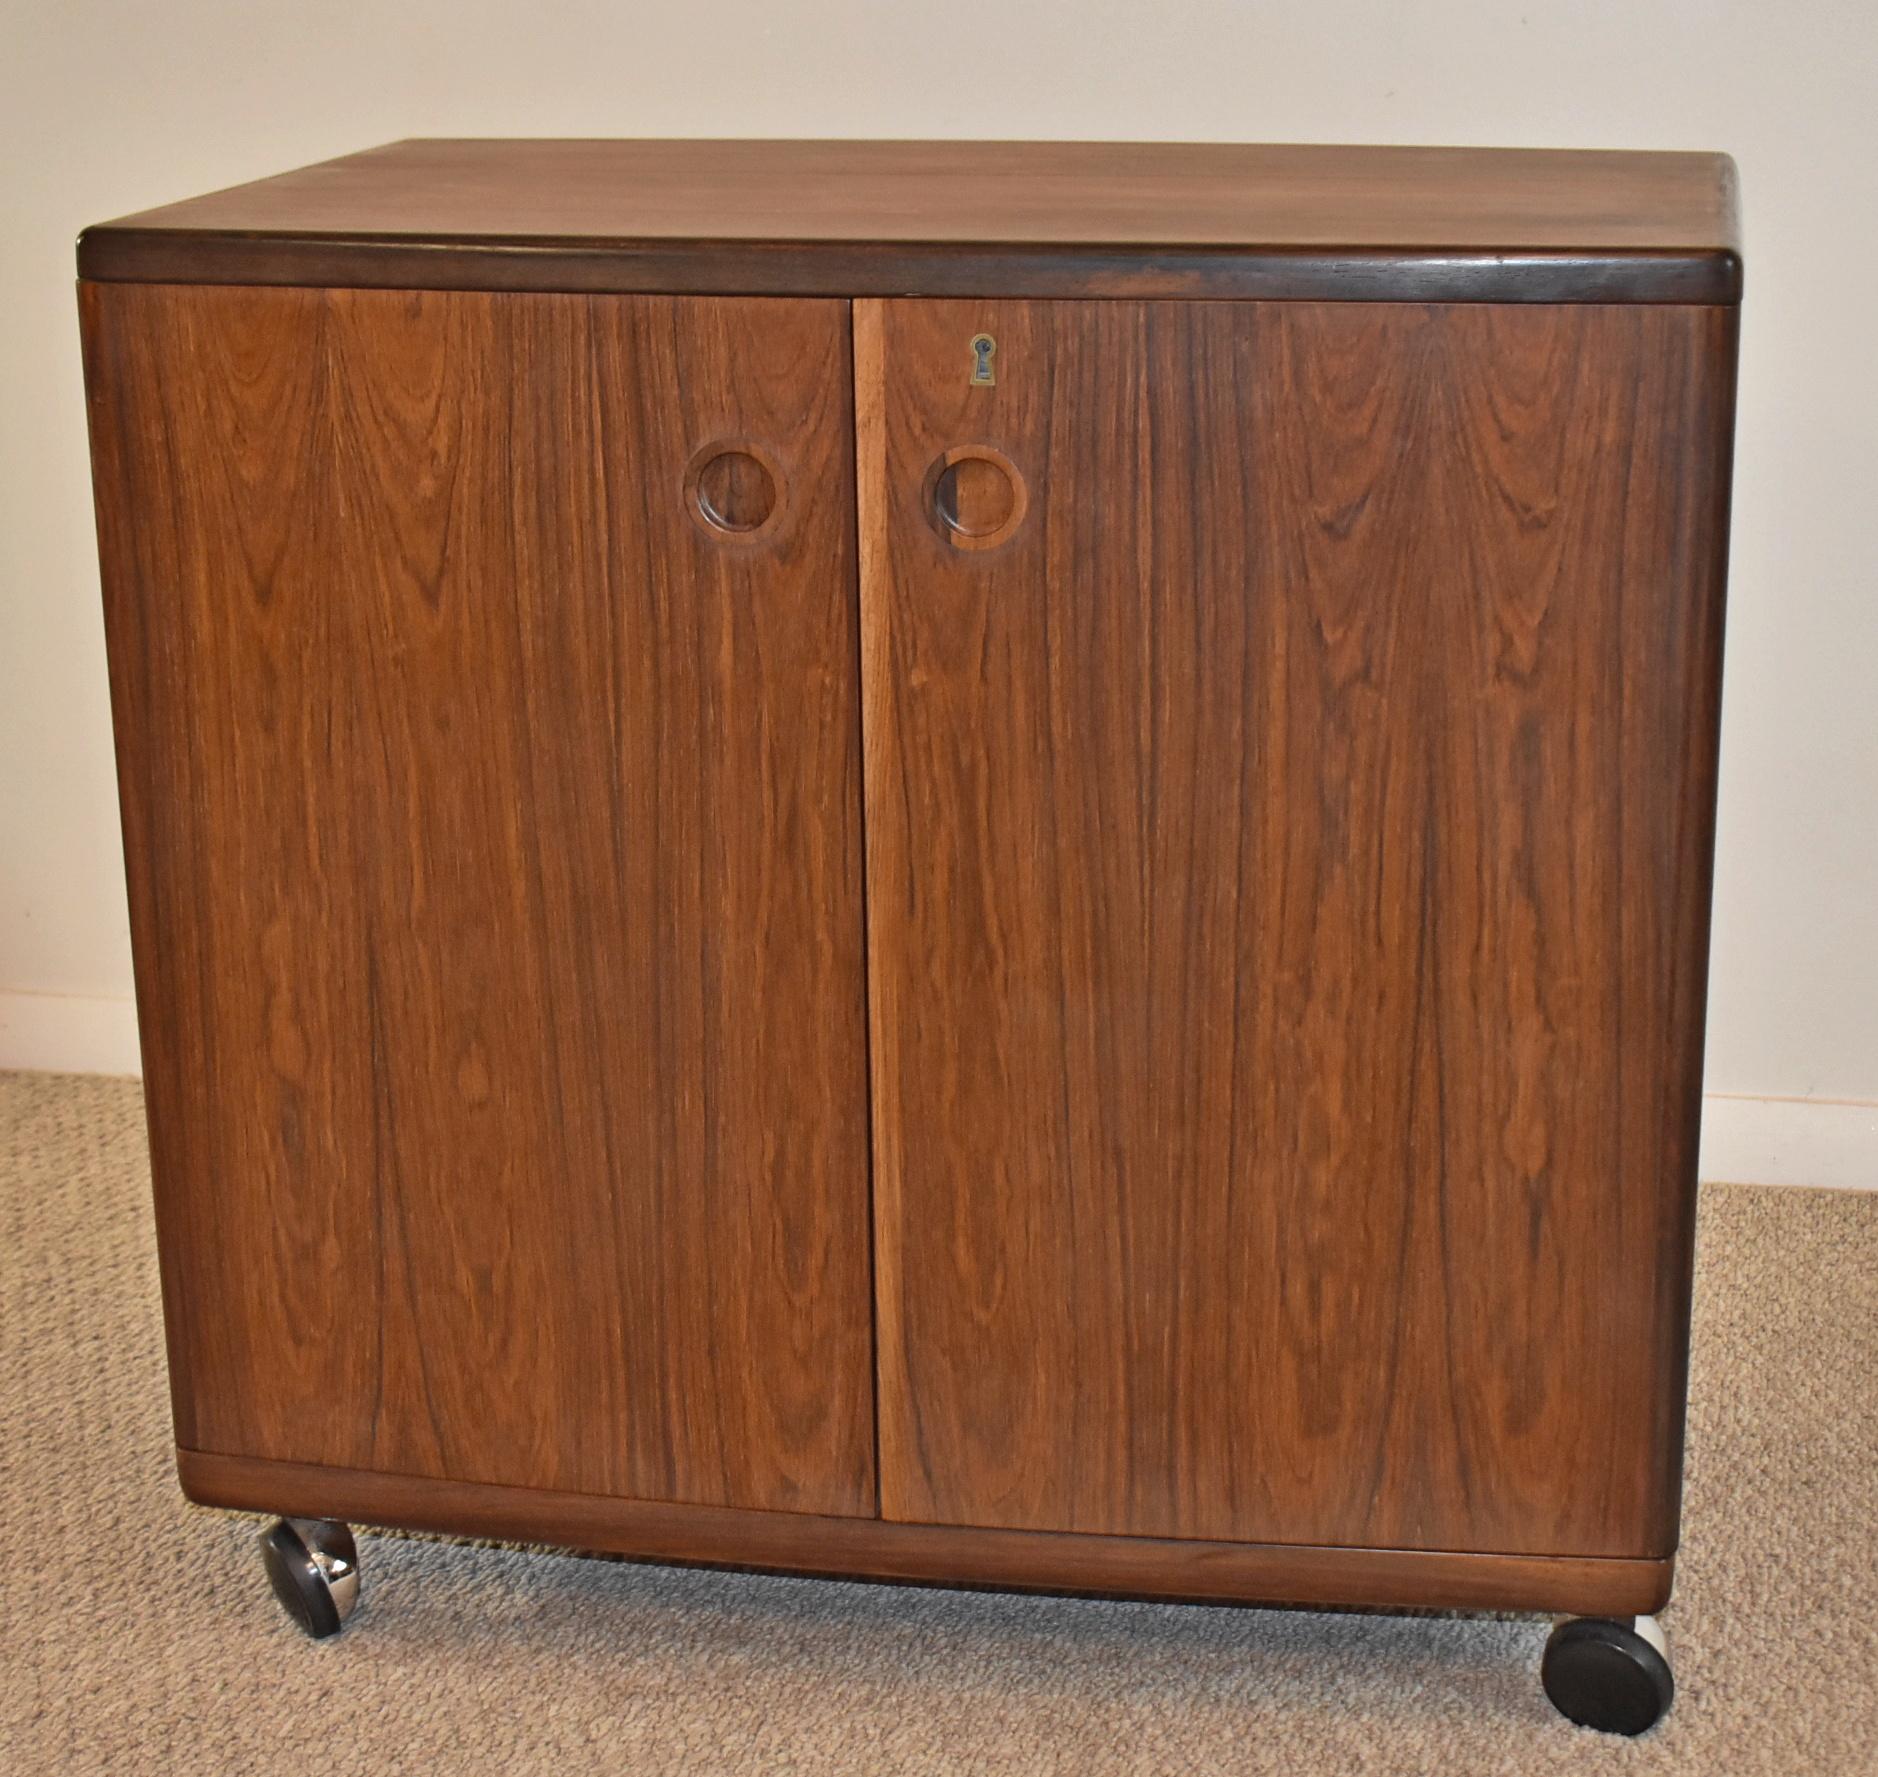 Rolling Bar Cabinet in Rosewood from CFC Silkeborg. Danish Mid-Century Rosewood drinks cabinet designed by Illum Wikkelso and produced by Silkeborg Mobelfabrik (CFC) in the 1960's. The cabinet features shelving to the backs of the twin doors, bottle